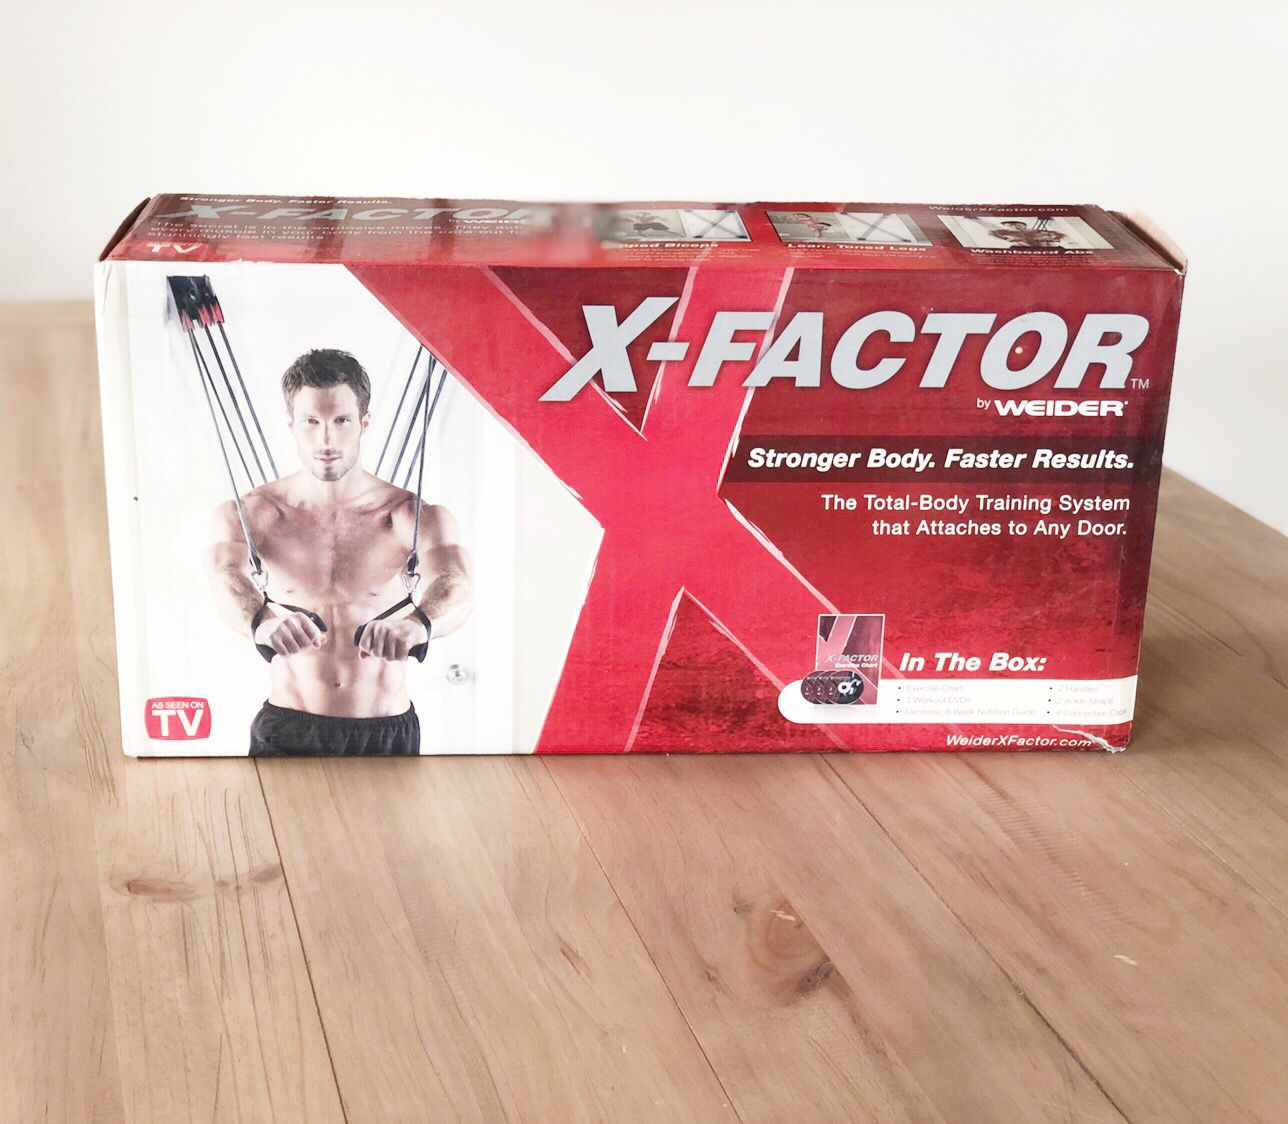 Home Exercise Equipment: X-Factor by Weider